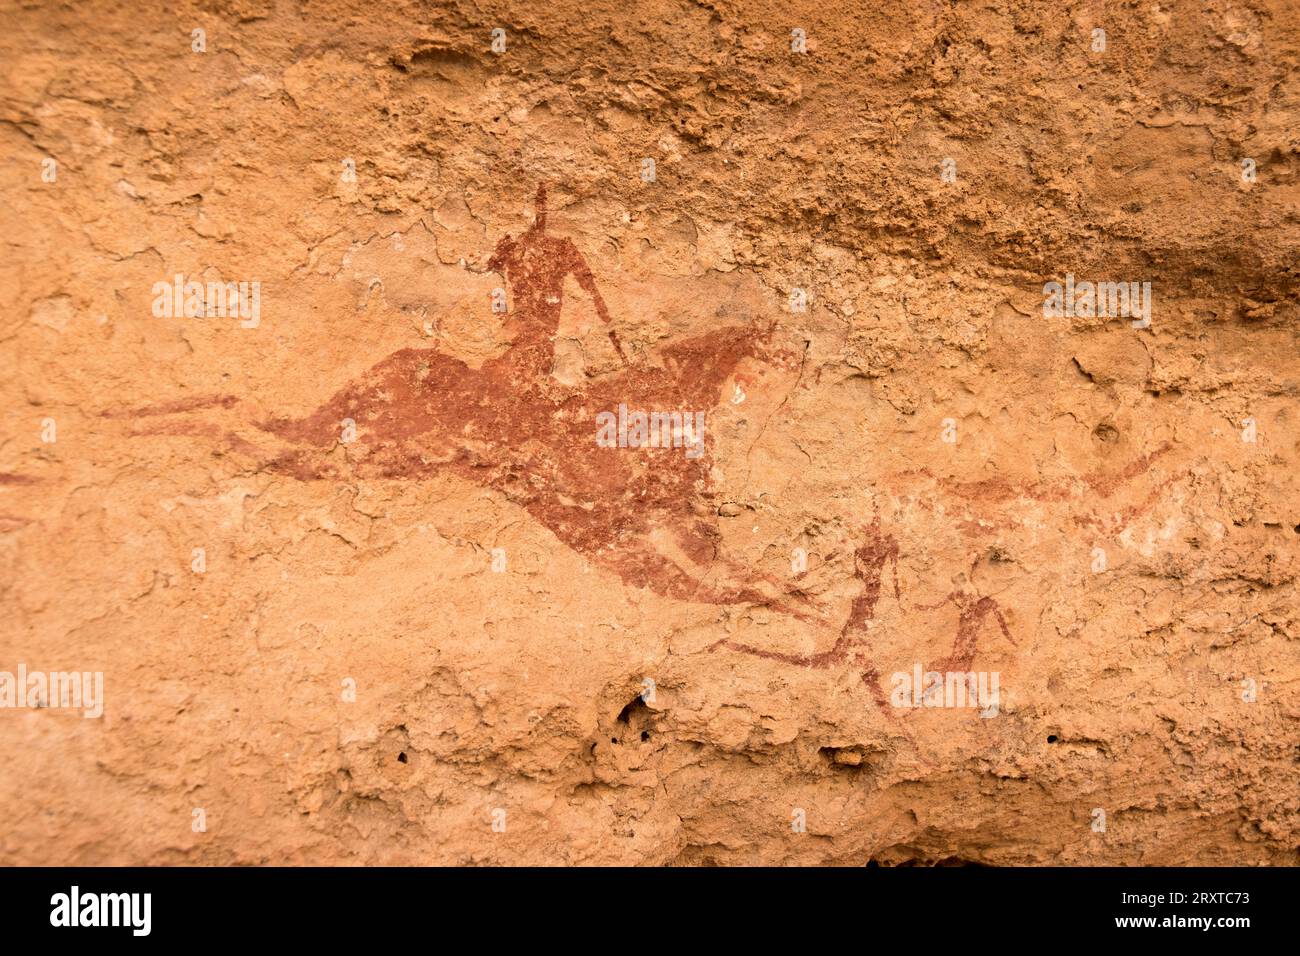 cave painting in the Ennedi desert, Chad, Central Africa Stock Photo